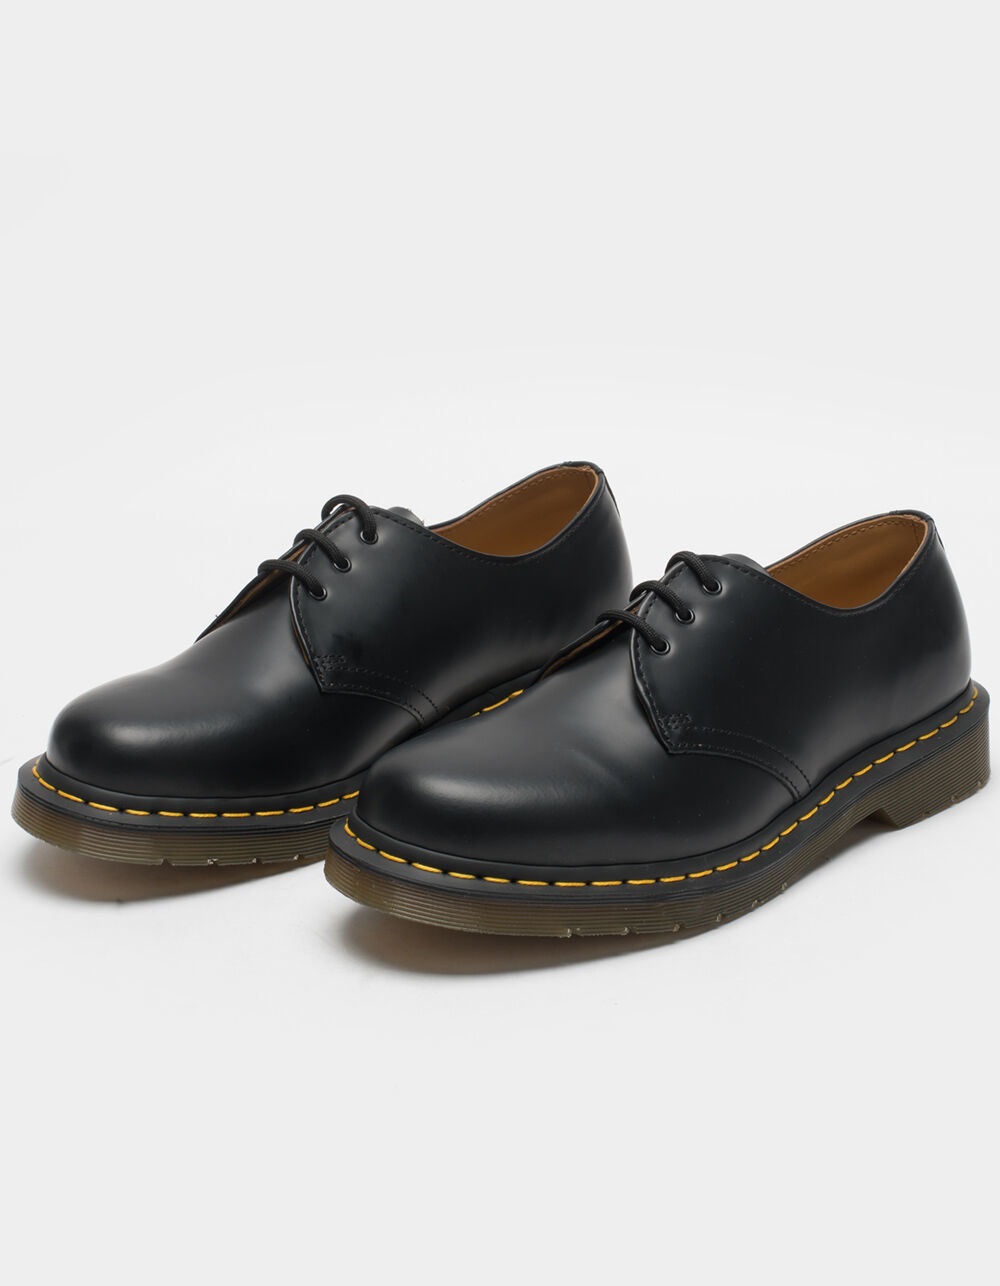 bullet Criminal Can be calculated DR. MARTENS 1461 Smooth Leather Mens Oxford Shoes - BLACK | Tillys